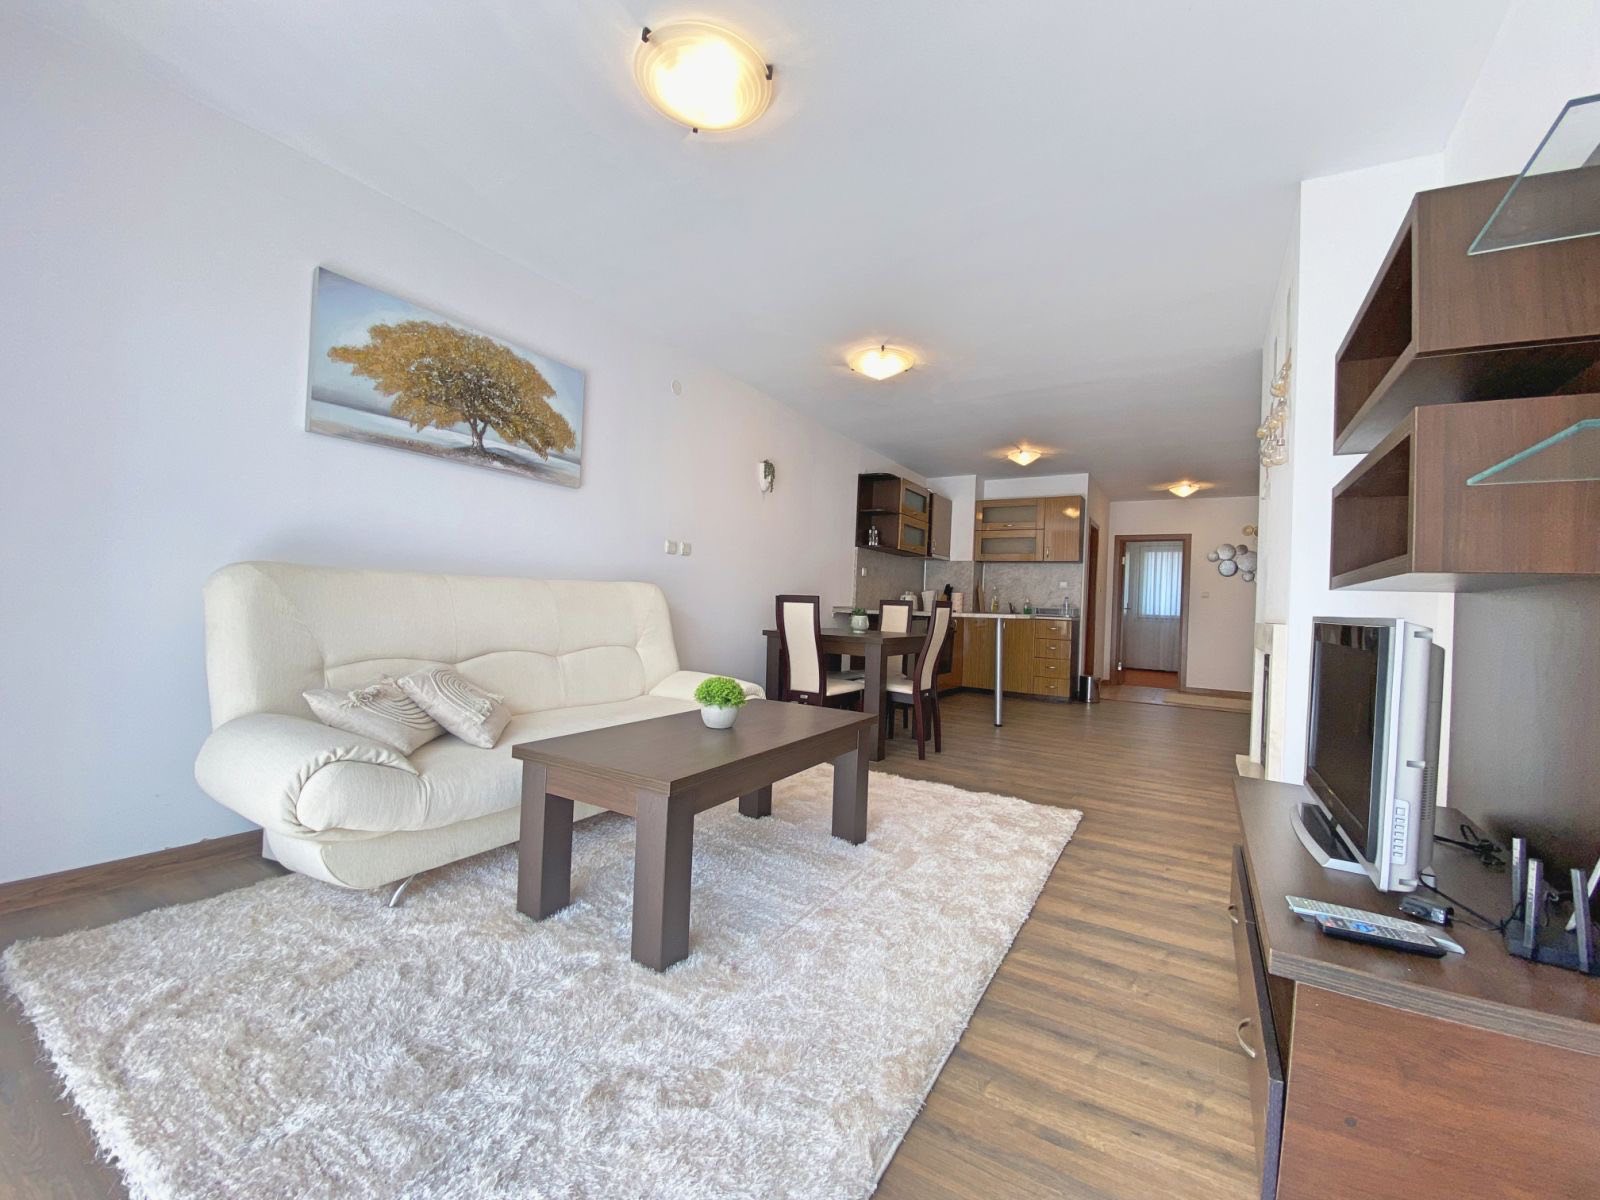 Bansko: Affordable one bedroom apartment for sale next to the White Lavina hotel